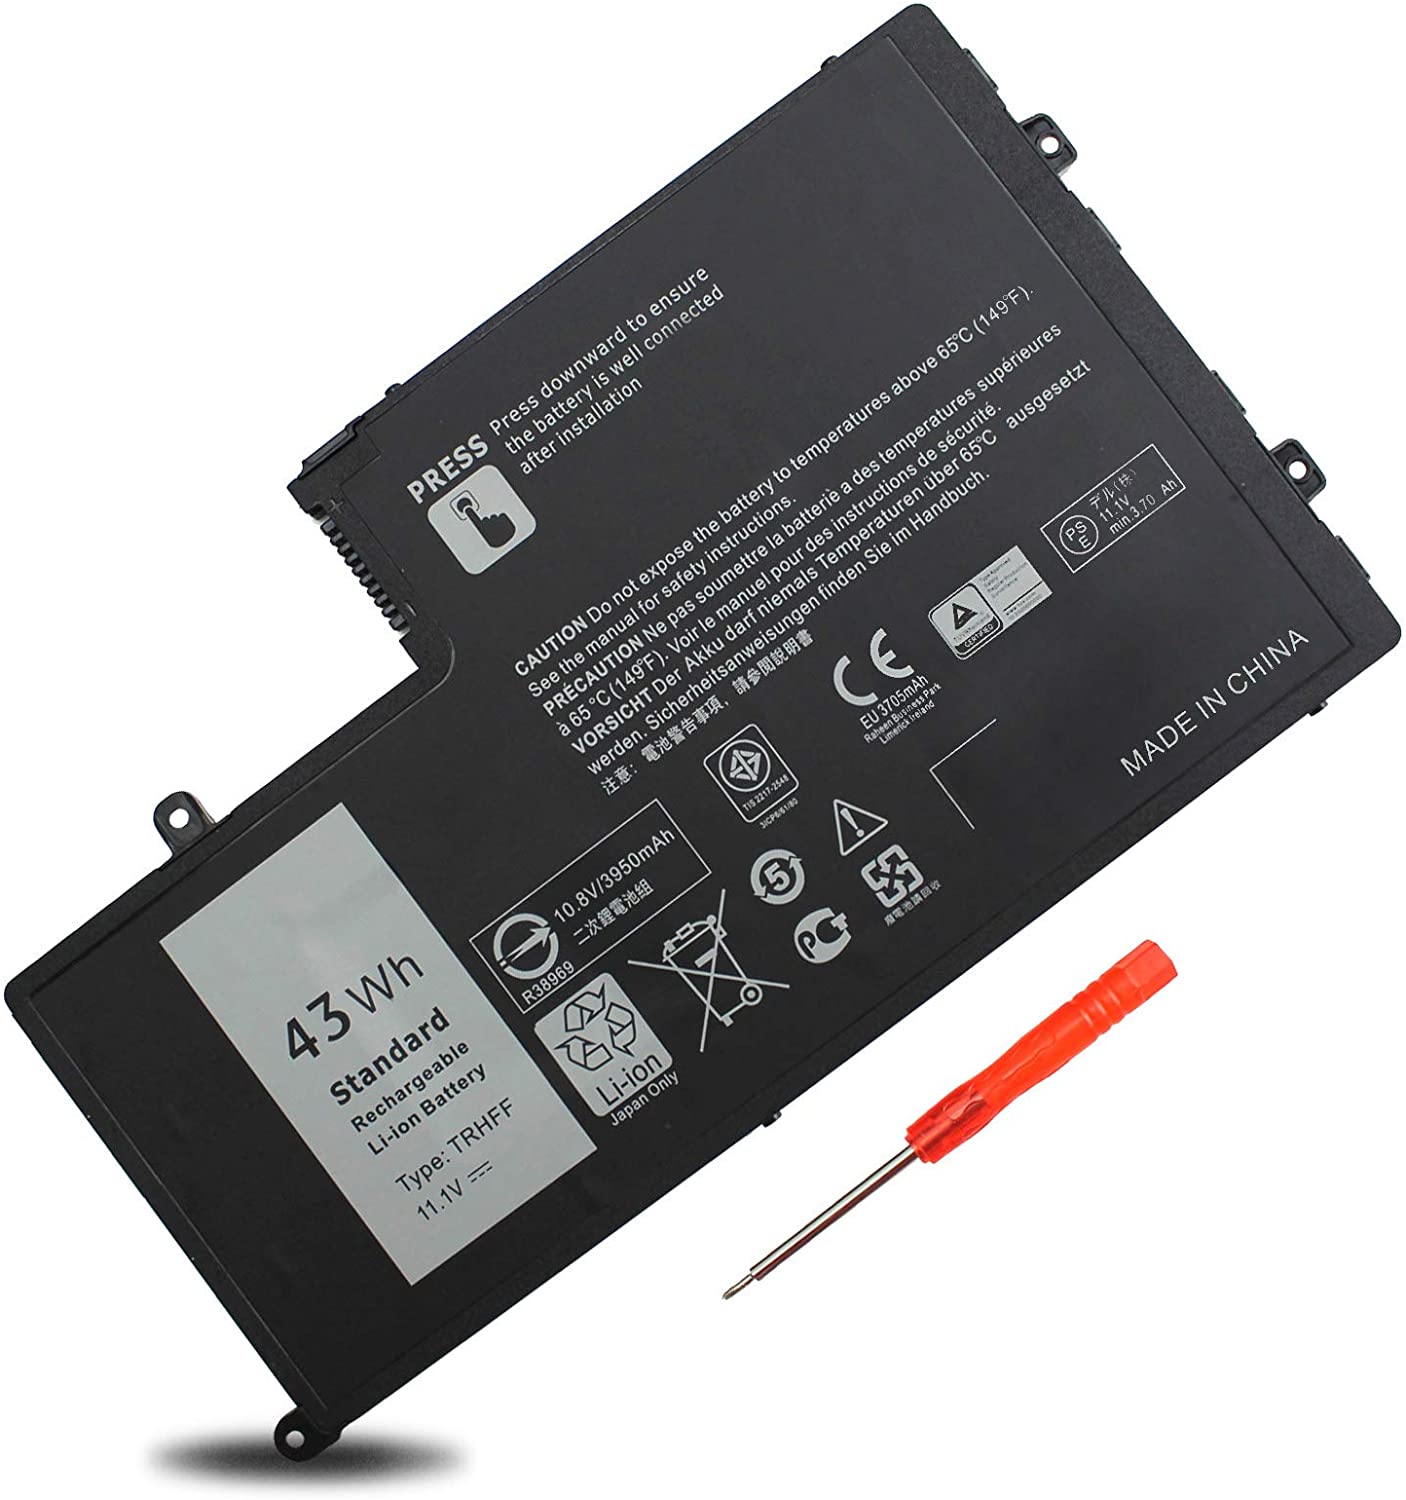 LXHY TRHFF 11.1V 43Wh 7600mAh Laptop Battery Compatible with Dell Inspiron 5447 5448 15-5548 14-5447 14-5448 15-5542 N5447 N5547 Latitude 3450 3550 15 3550 Replacement P39F 1V2F6 01v2f6 0PD19